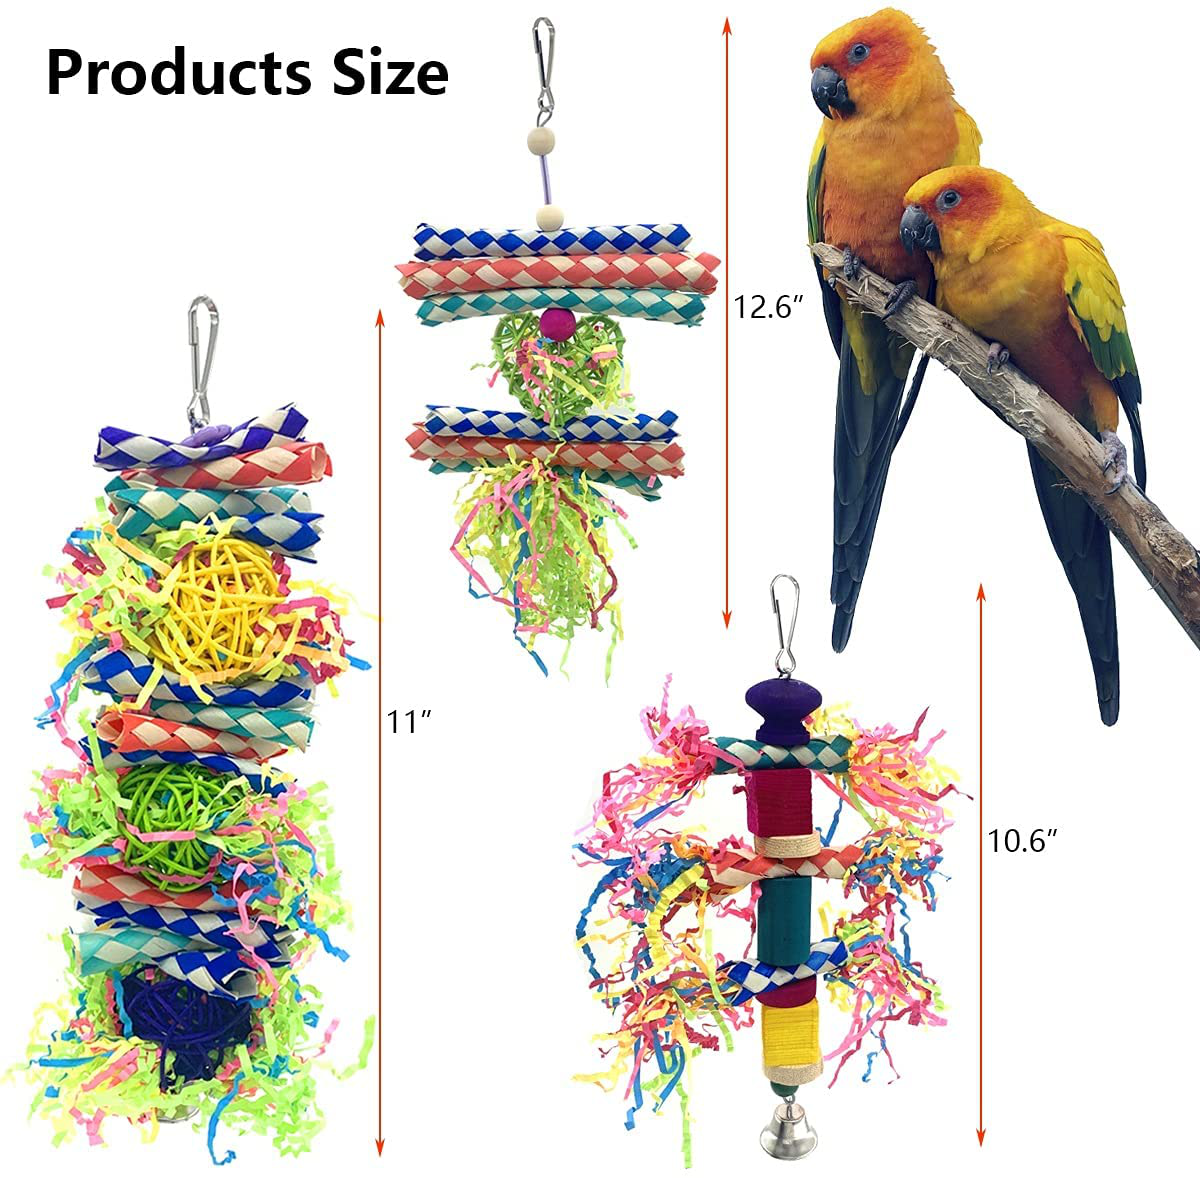 Vehomy Bird Shredding Toys Parrot Bamboo Chewing Toy Bird Wooden Block Foraging Toy with Natural Vine Balls Small Medium Bird Shredder Toys for Conures, Parakeets, Cockatiel